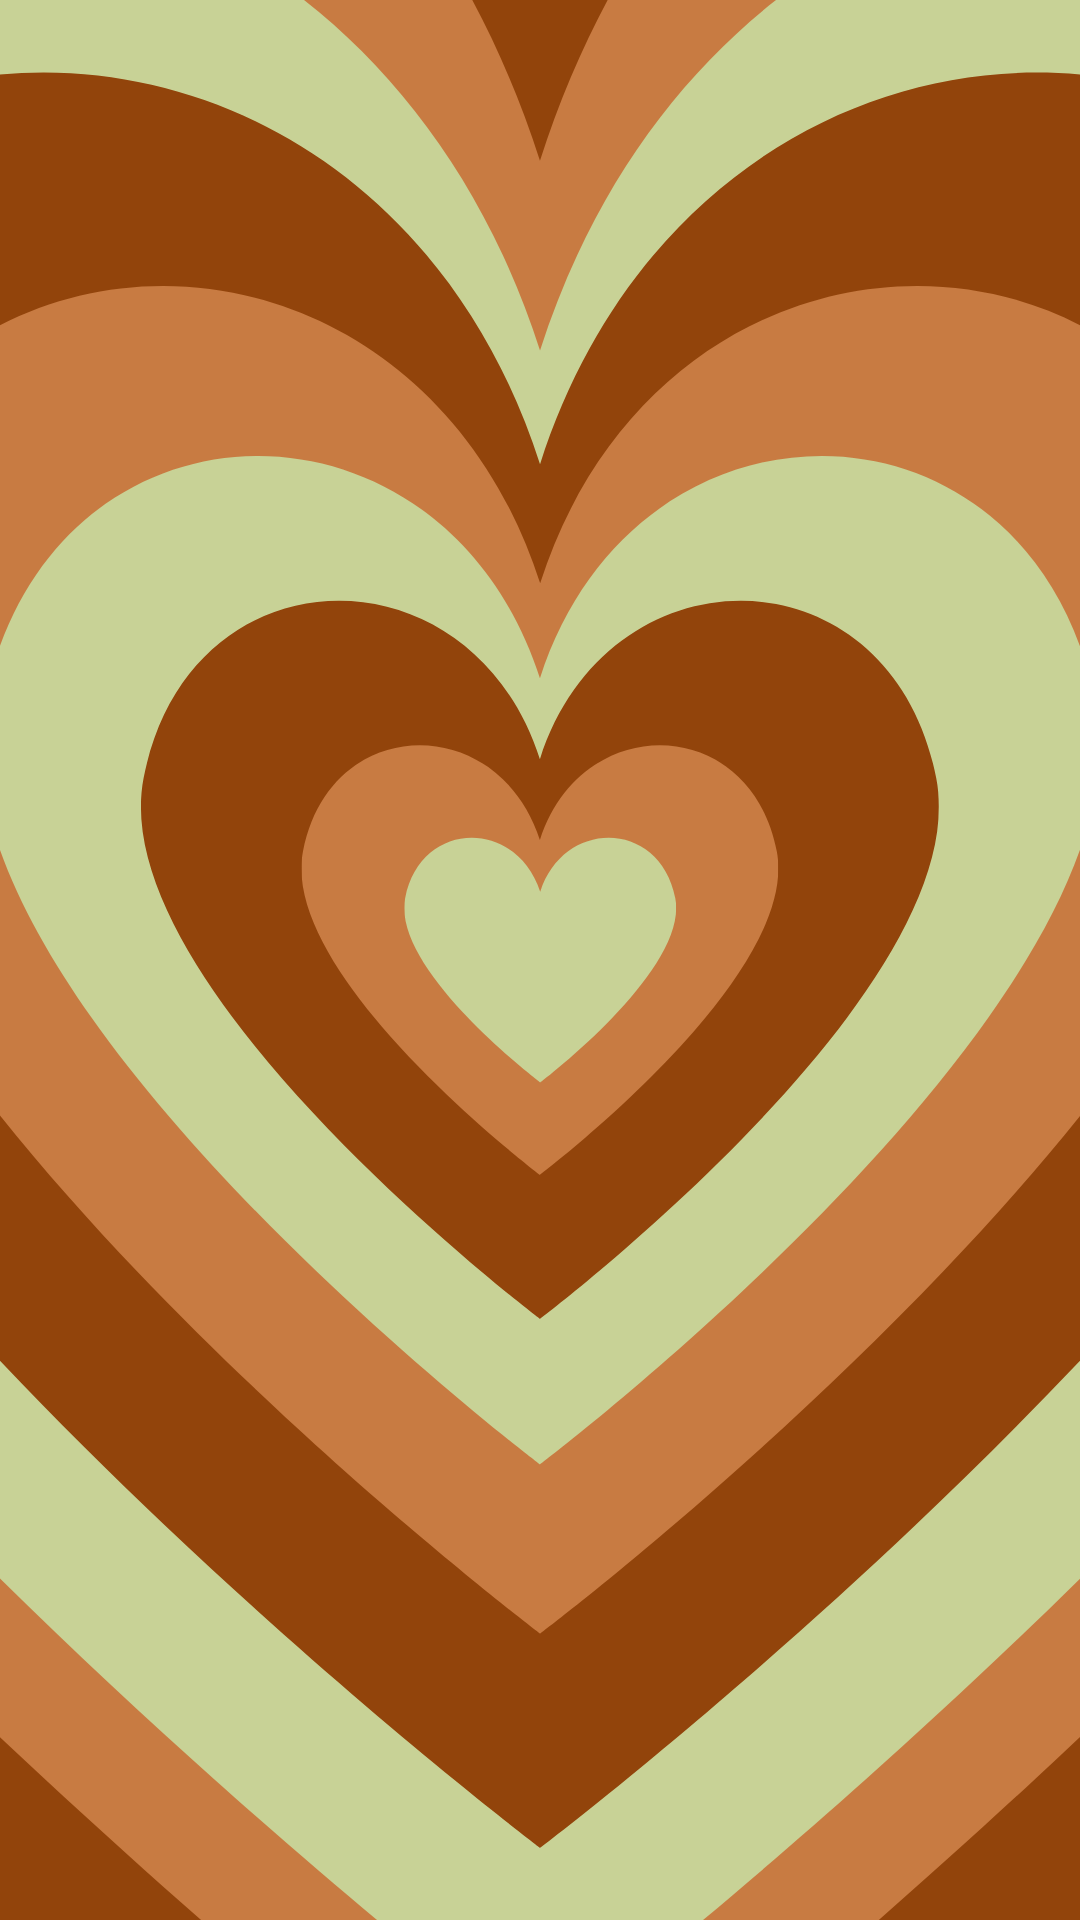 Aesthetic Heart Design Brown and Green Wallpaper